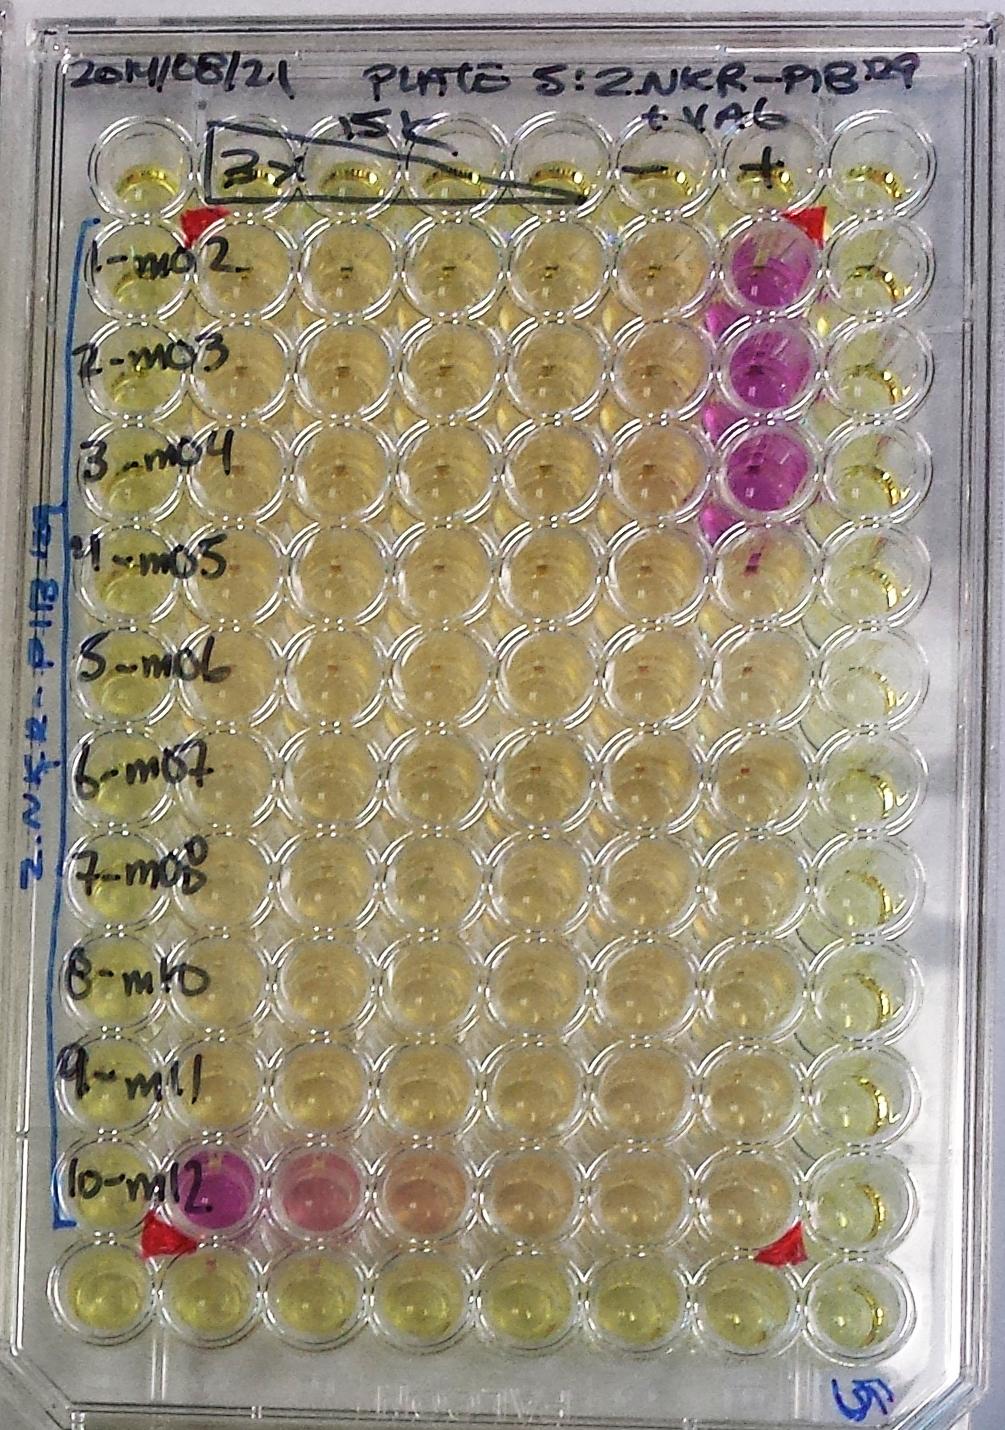 Assays showing the first identification of the viral decoy protein m12 in 2014. The researchers used cells expressing viral immunoevasins, cultured with reporter cells expressing the NK cell receptor. A positive interaction (bottom left, labelled m12) turns the solution from yellow to red. Photo by Oscar Aguilar.